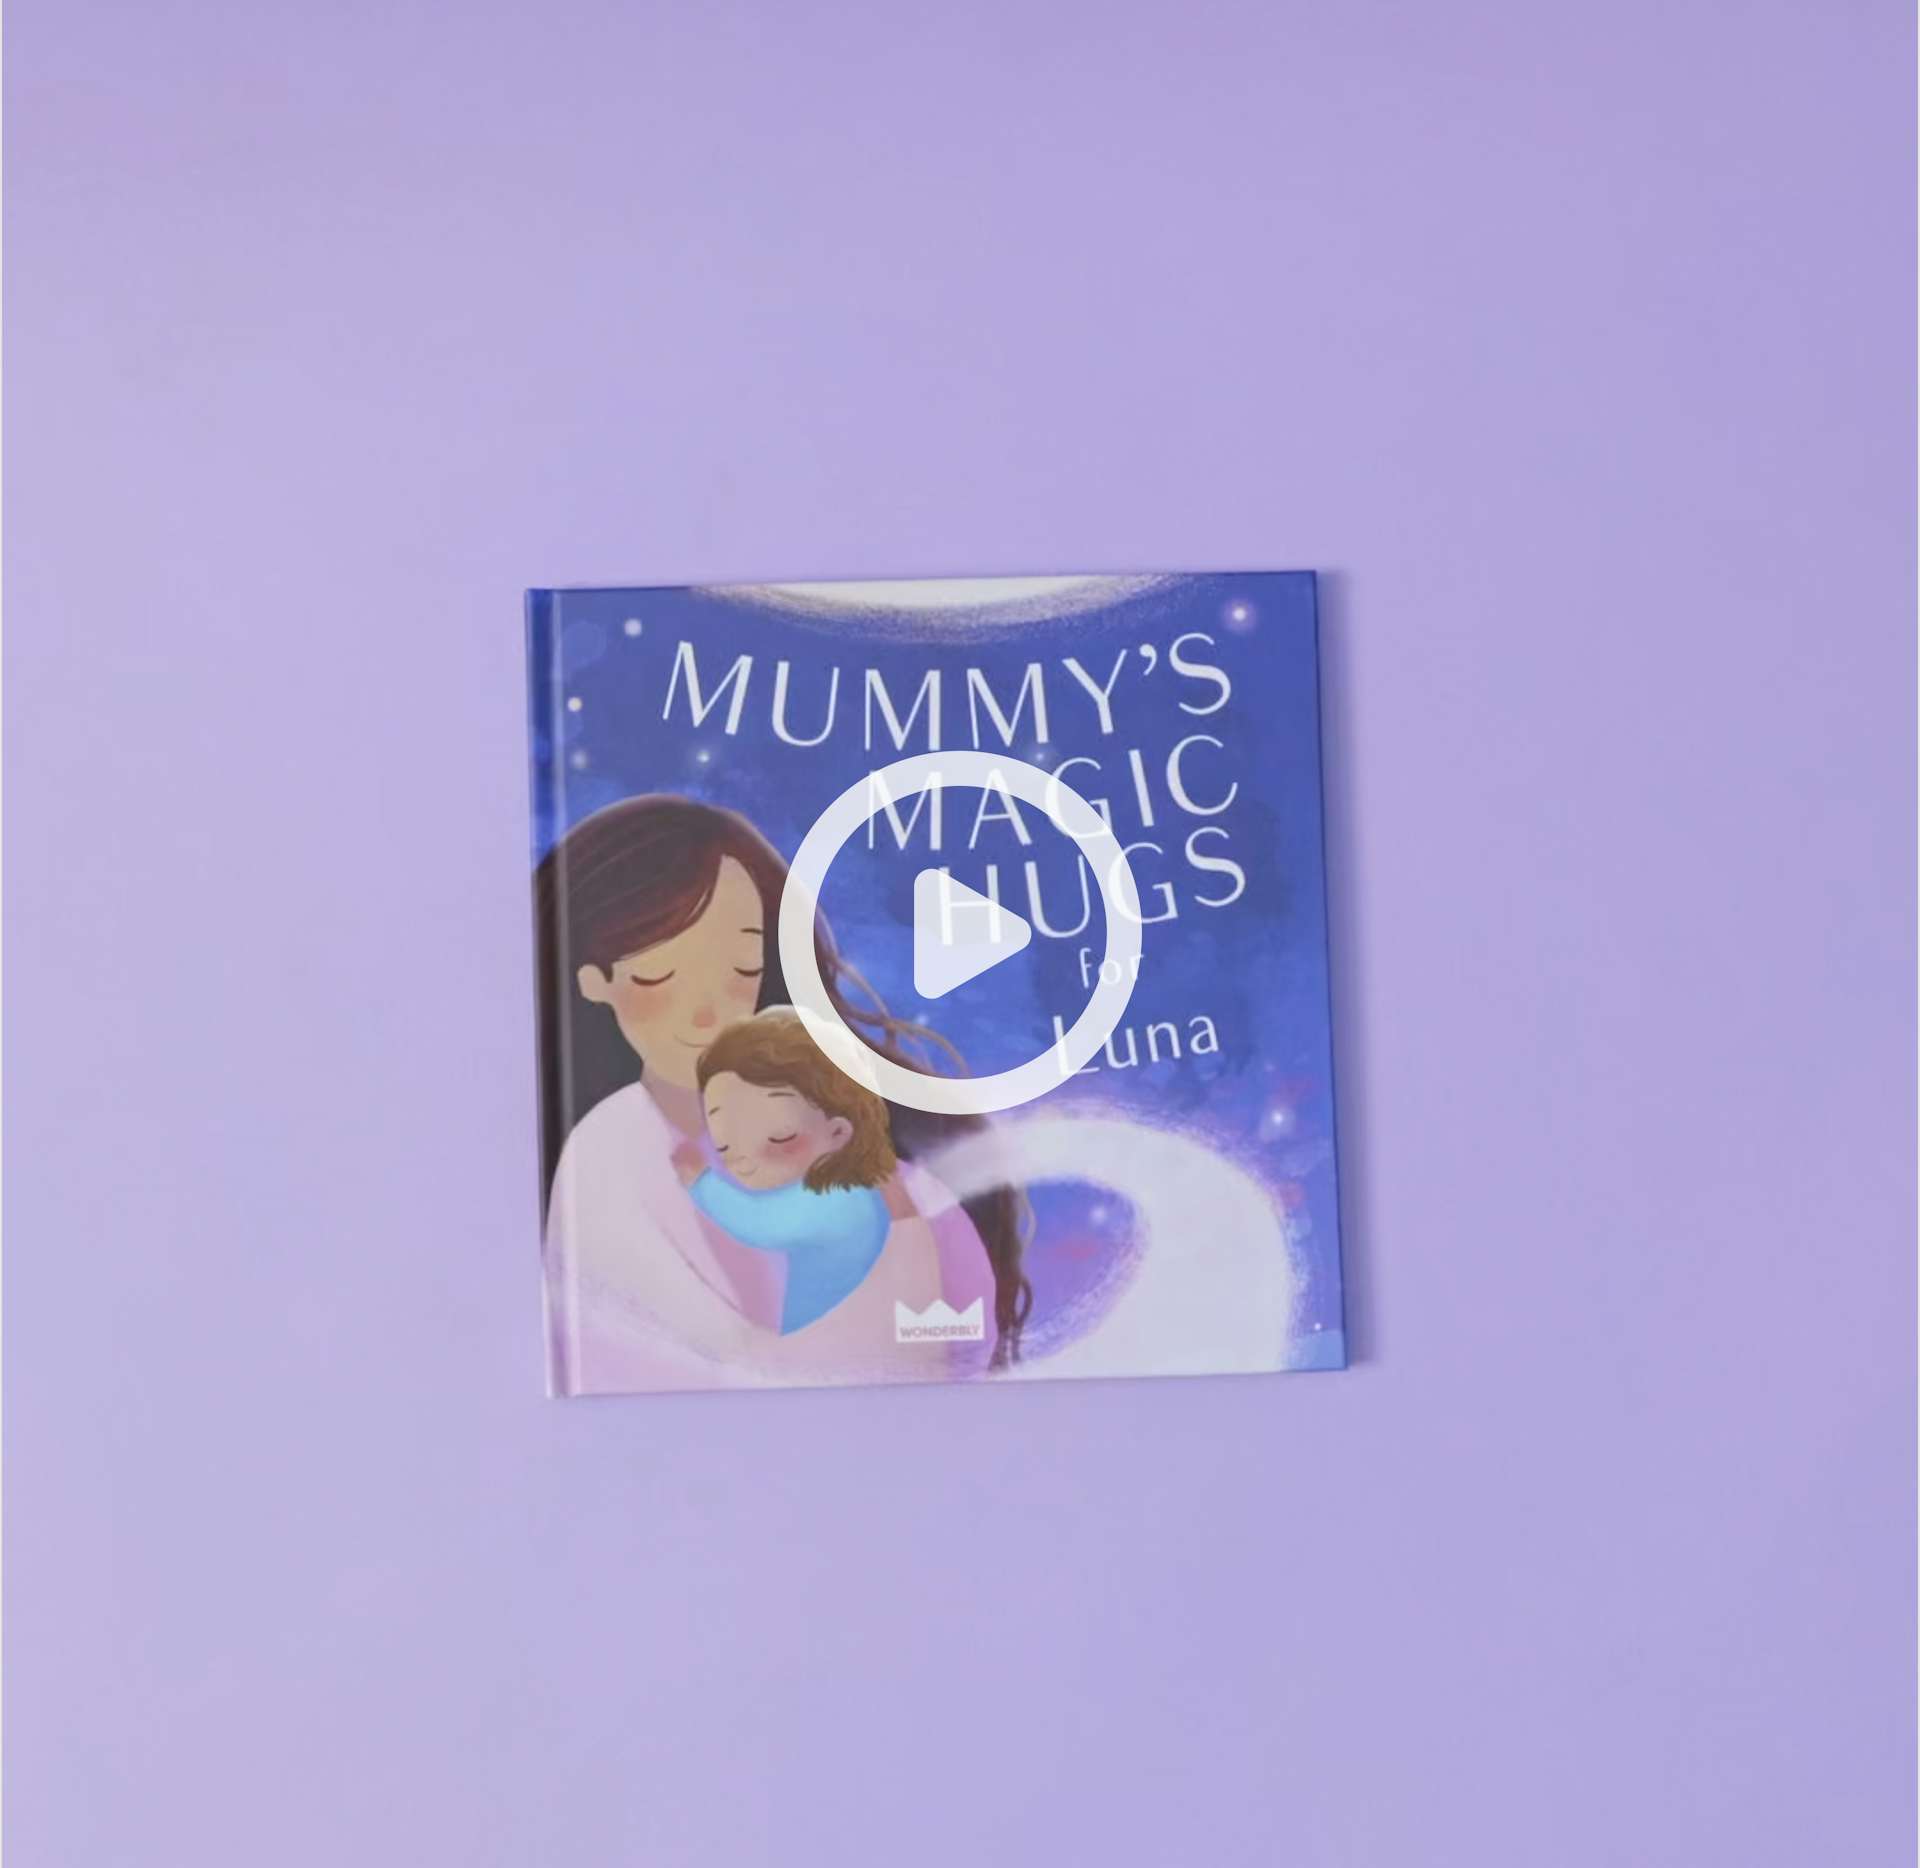 mummy's magic hugs book with a 'play' icon